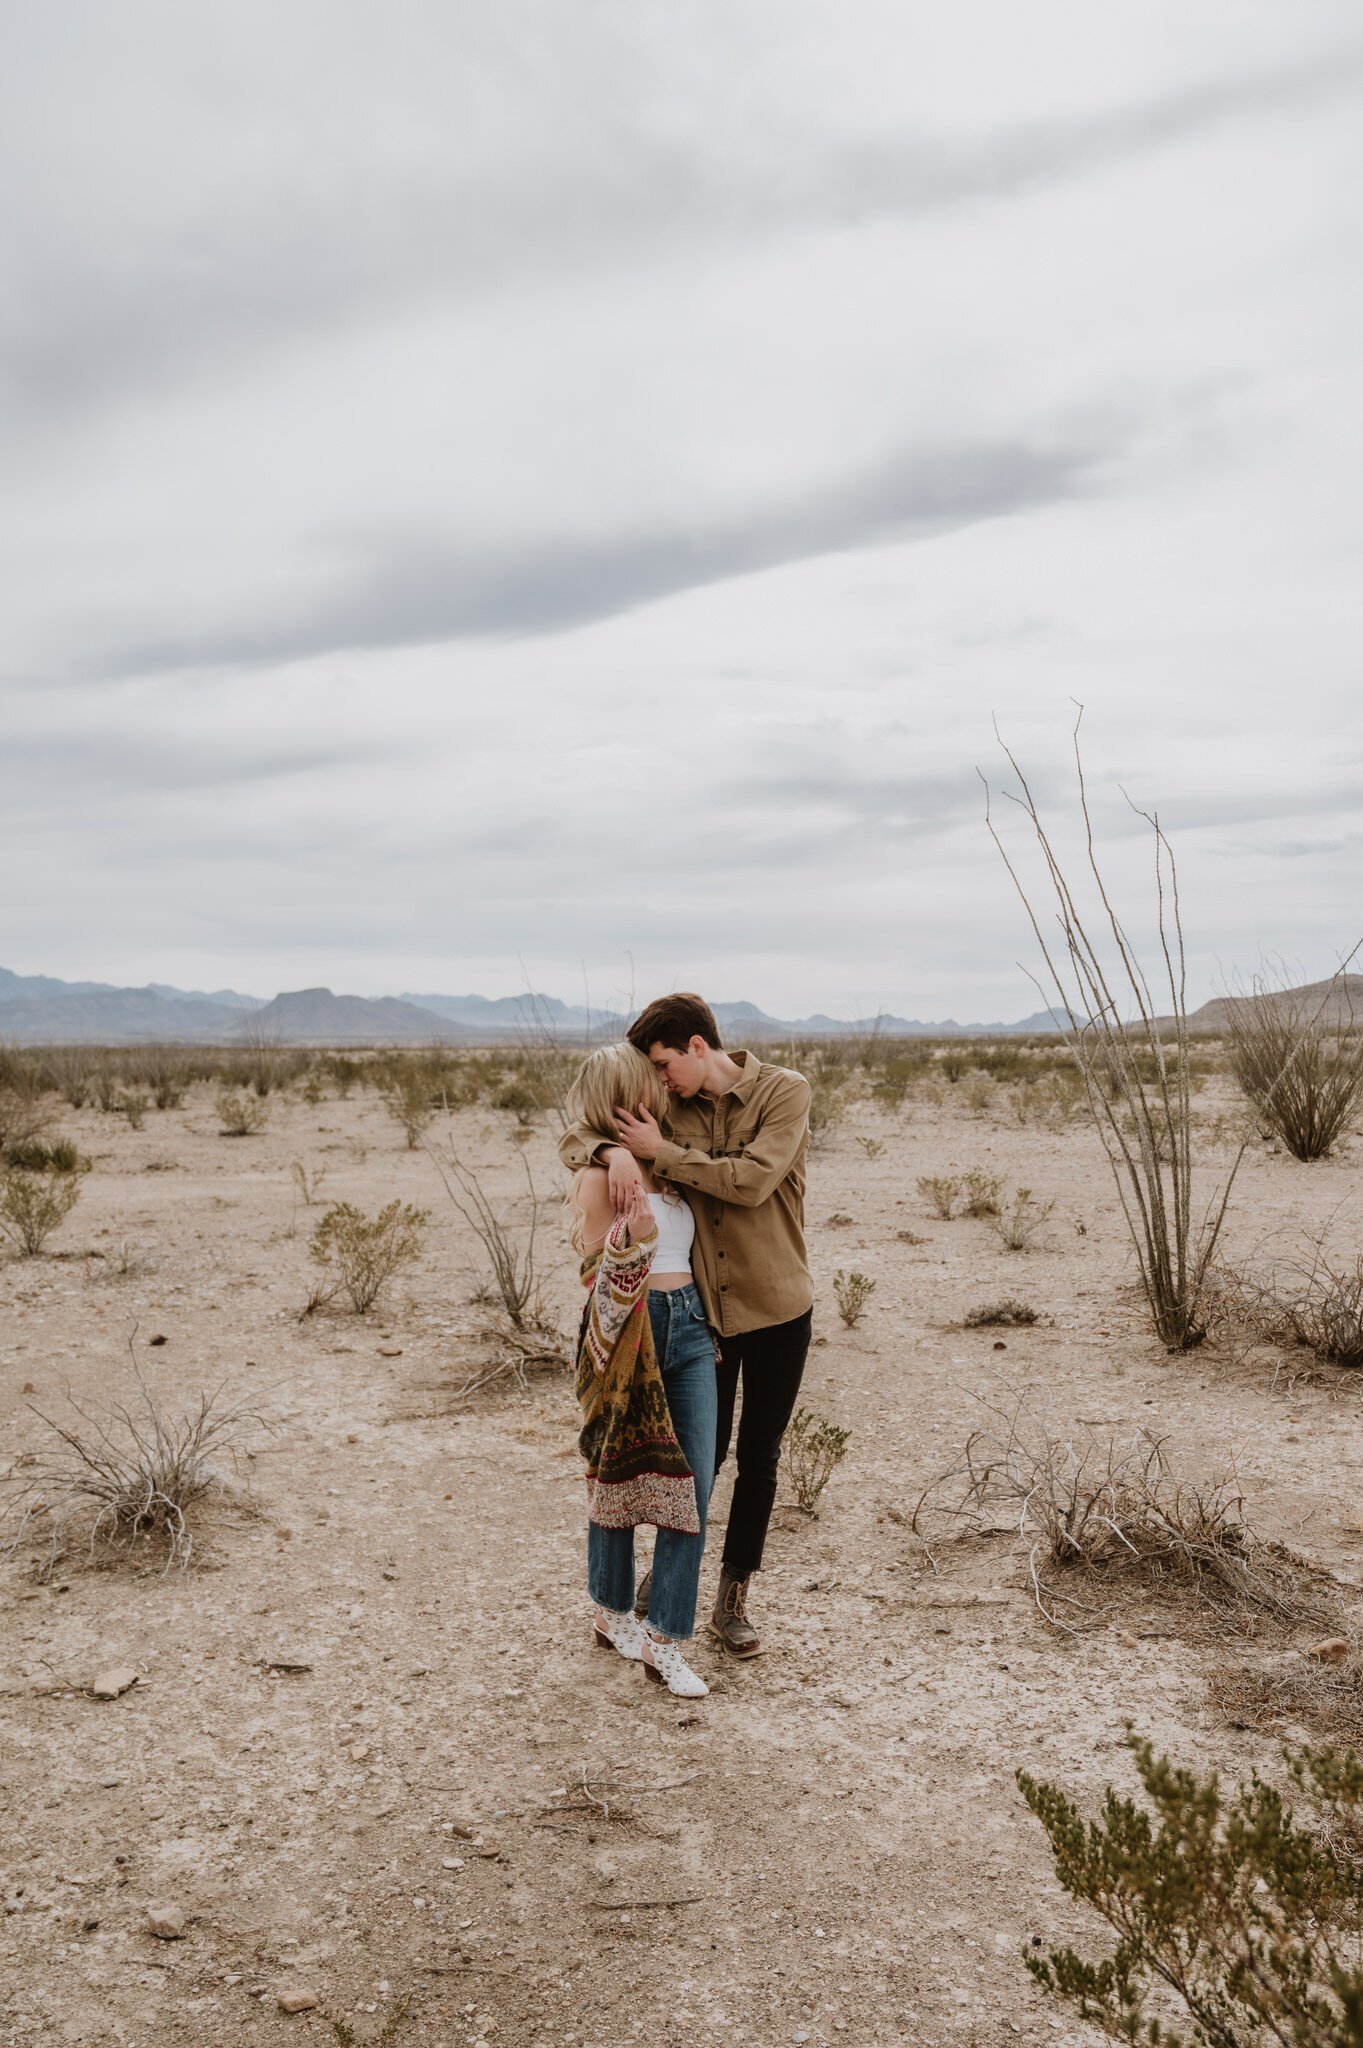 Kaylie-Sirek-Photography-Big-Bend-National-Park-Texas-Engagement-Session-Styled-You-017.jpg